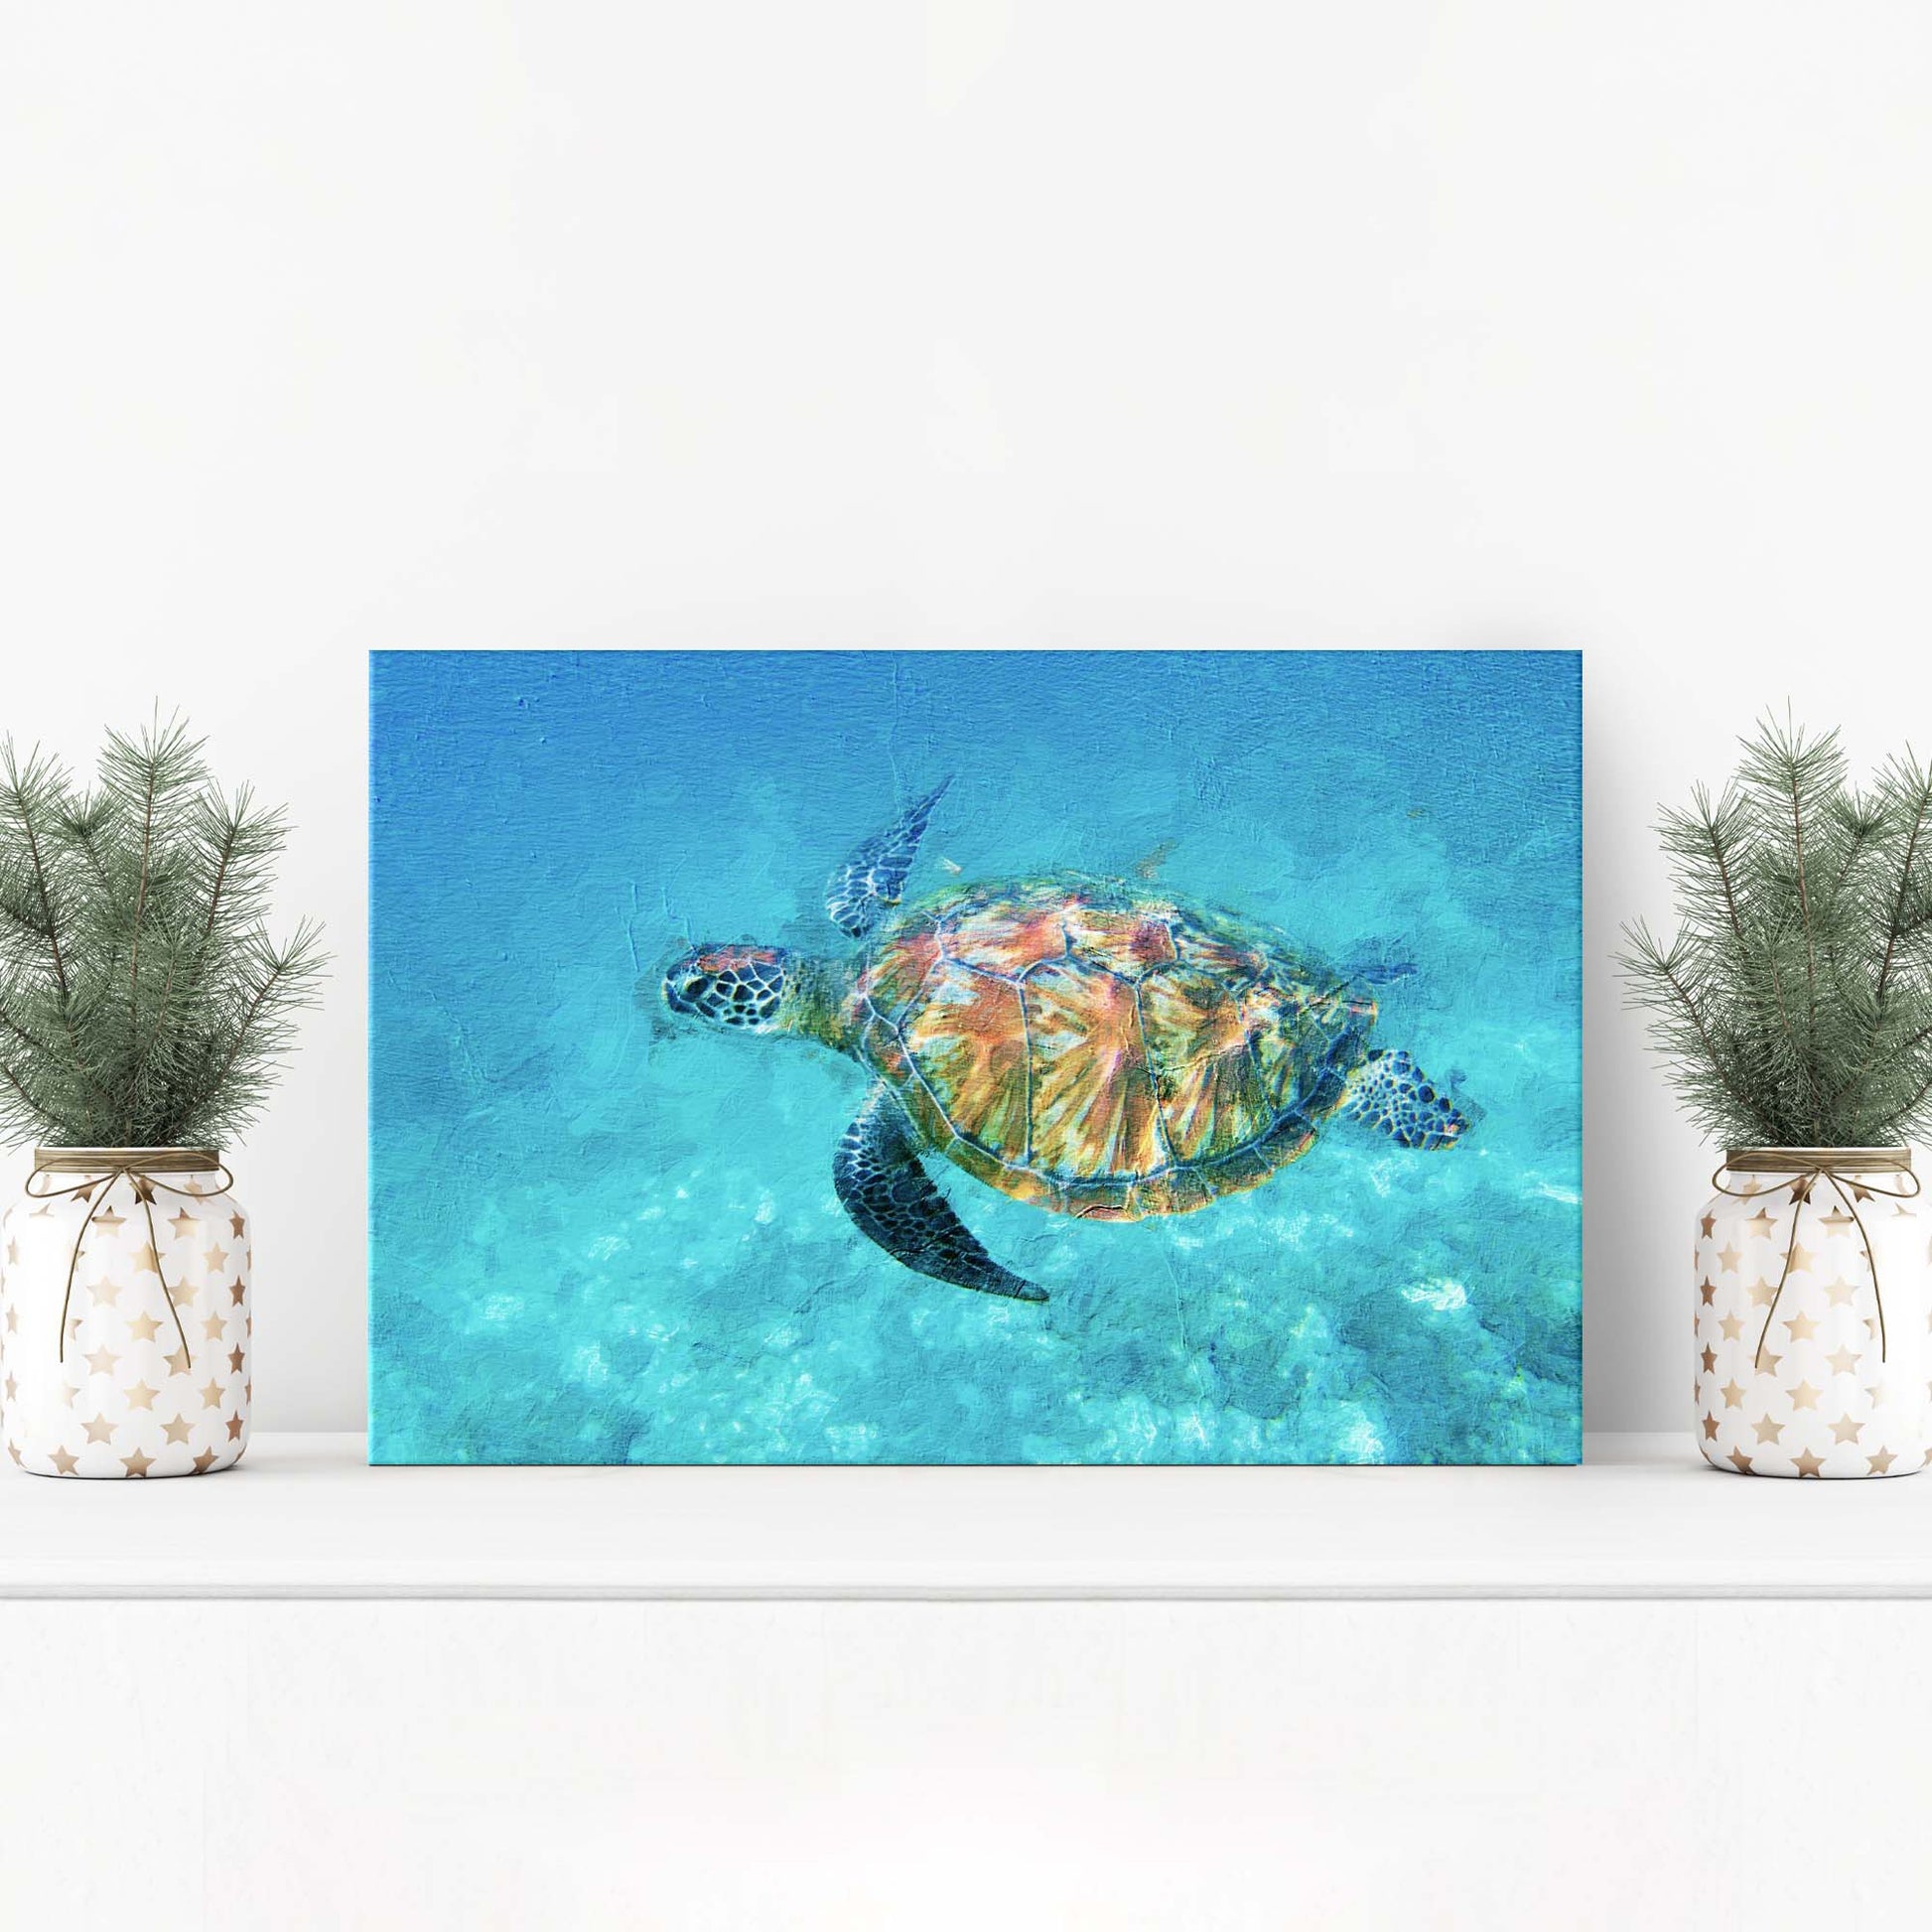 Green Sea Turtle Oil Paint Canvas Wall Art - Image by Tailored Canvases